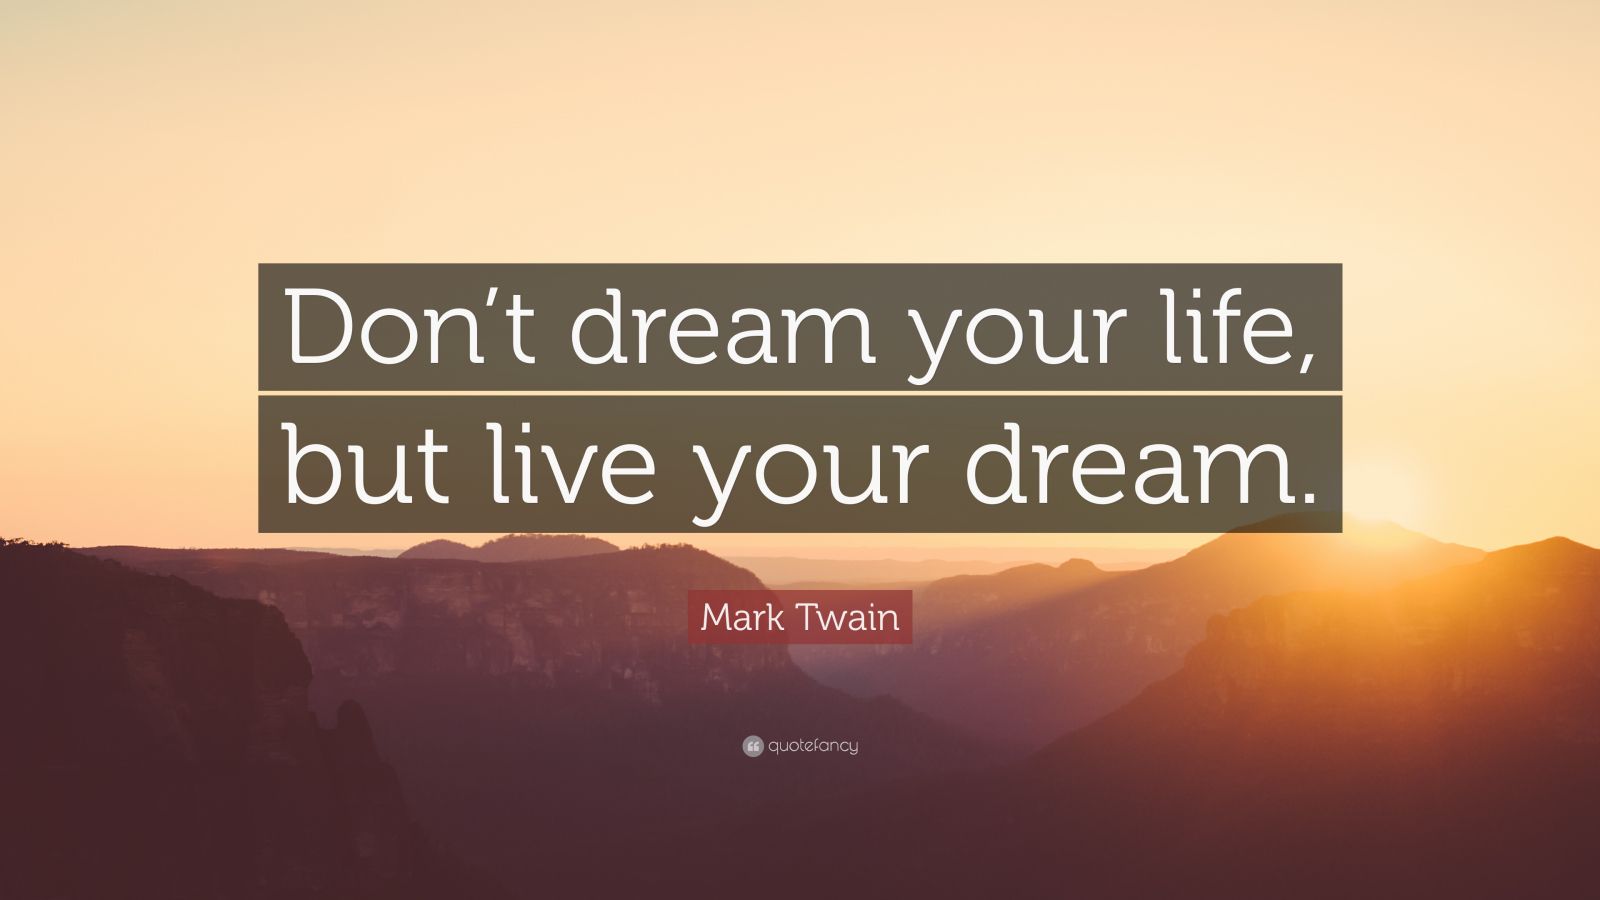 Mark Twain Quote “Don’t dream your life, but live your